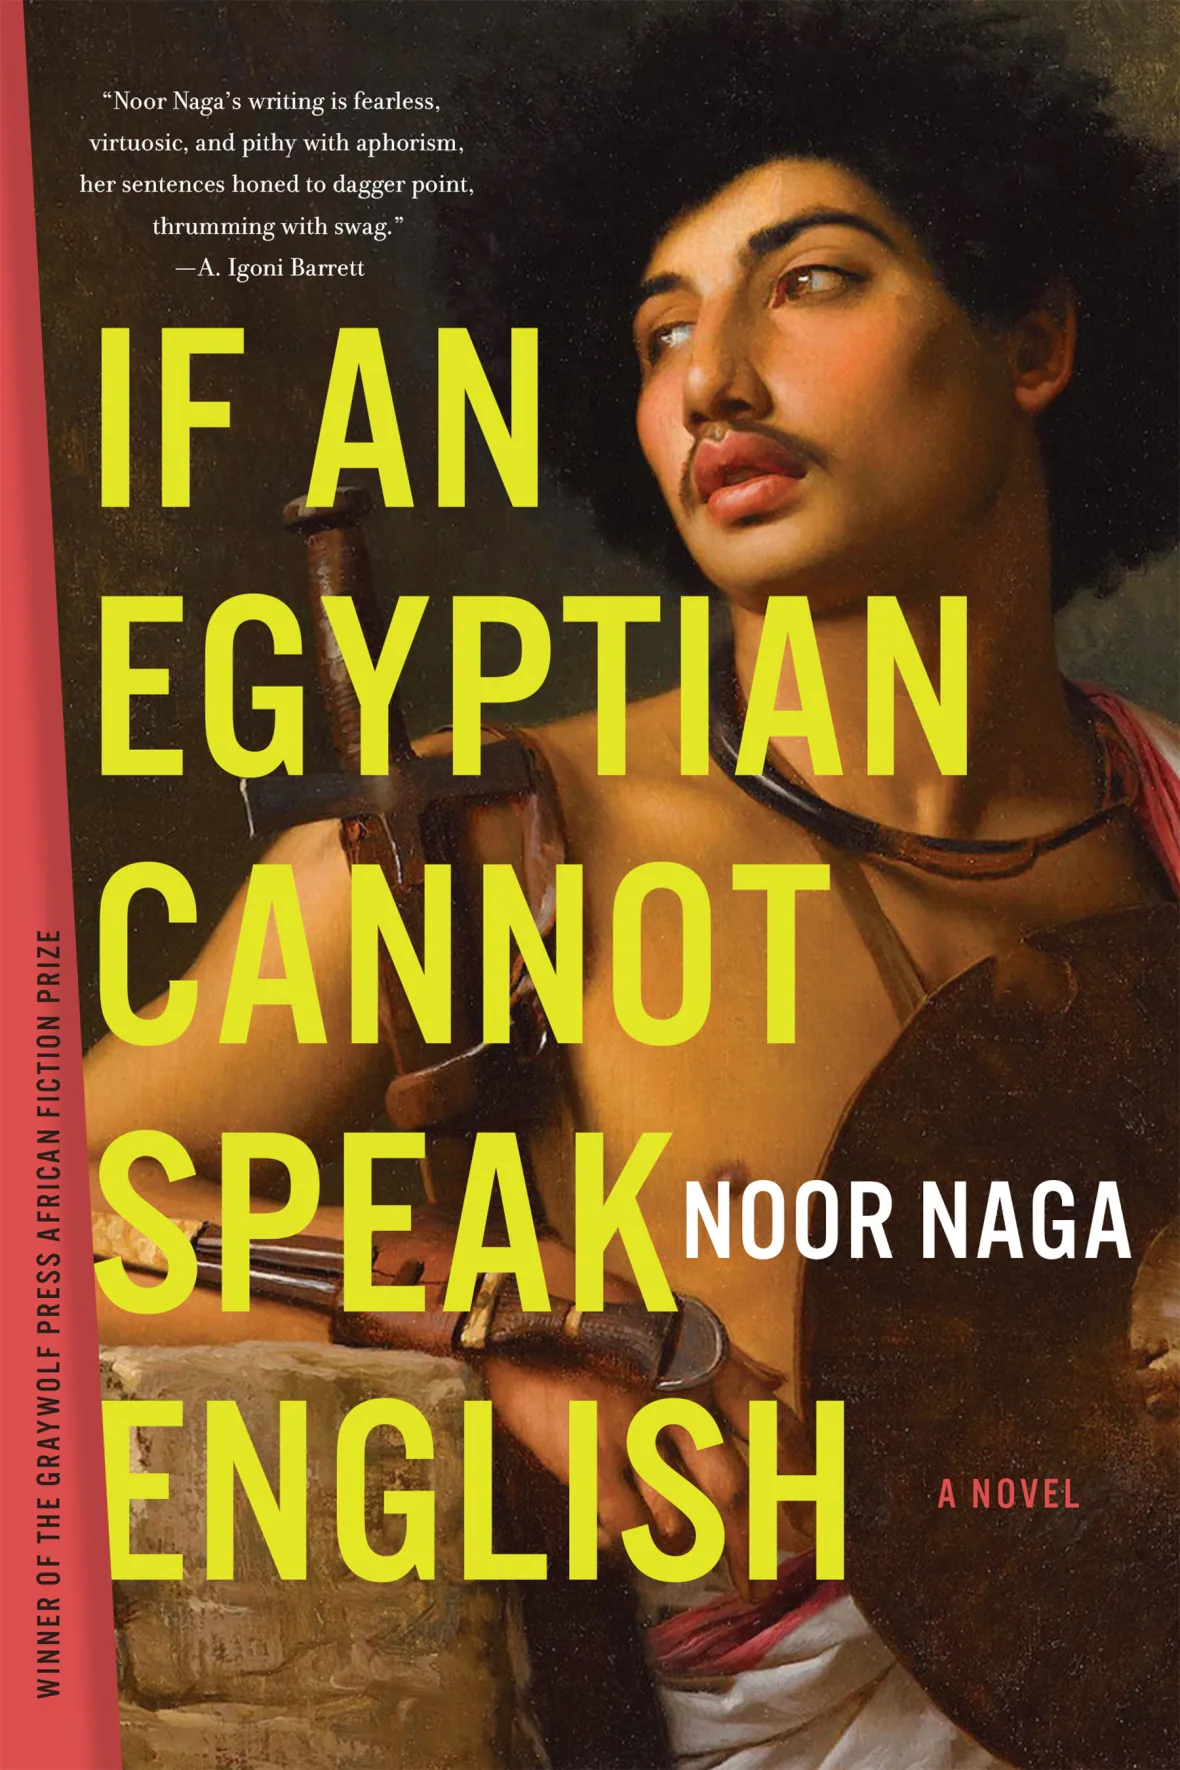 Cover of the novel "If an Egyptian Cannot Speak English," a shirtless man holding a shield and dagger on the front cover